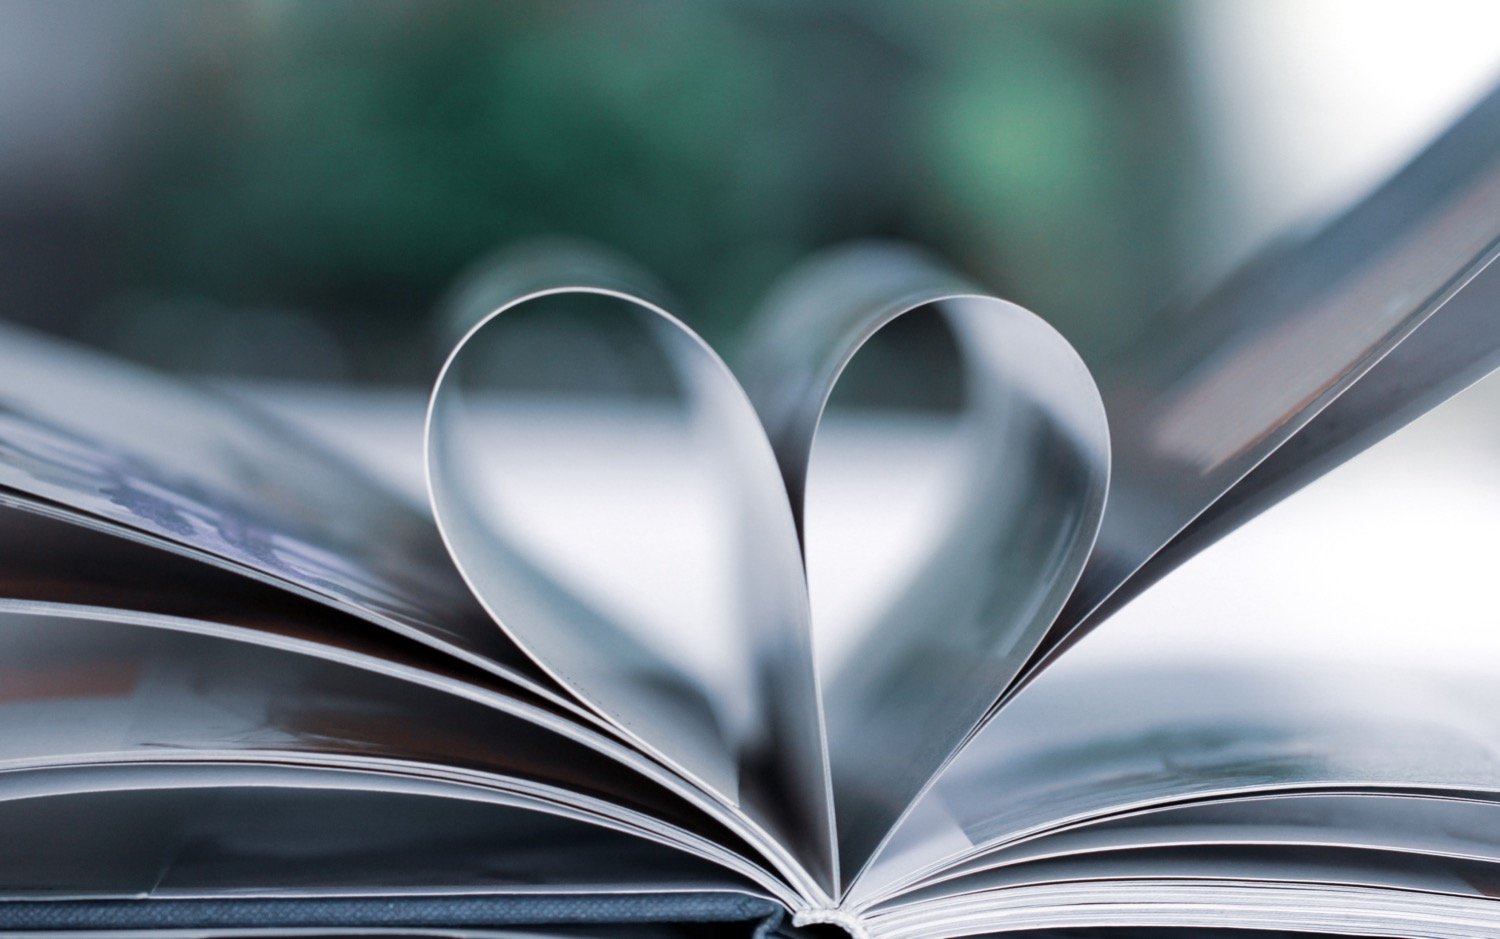 Book pages in the shape of a heart to represent grief healing